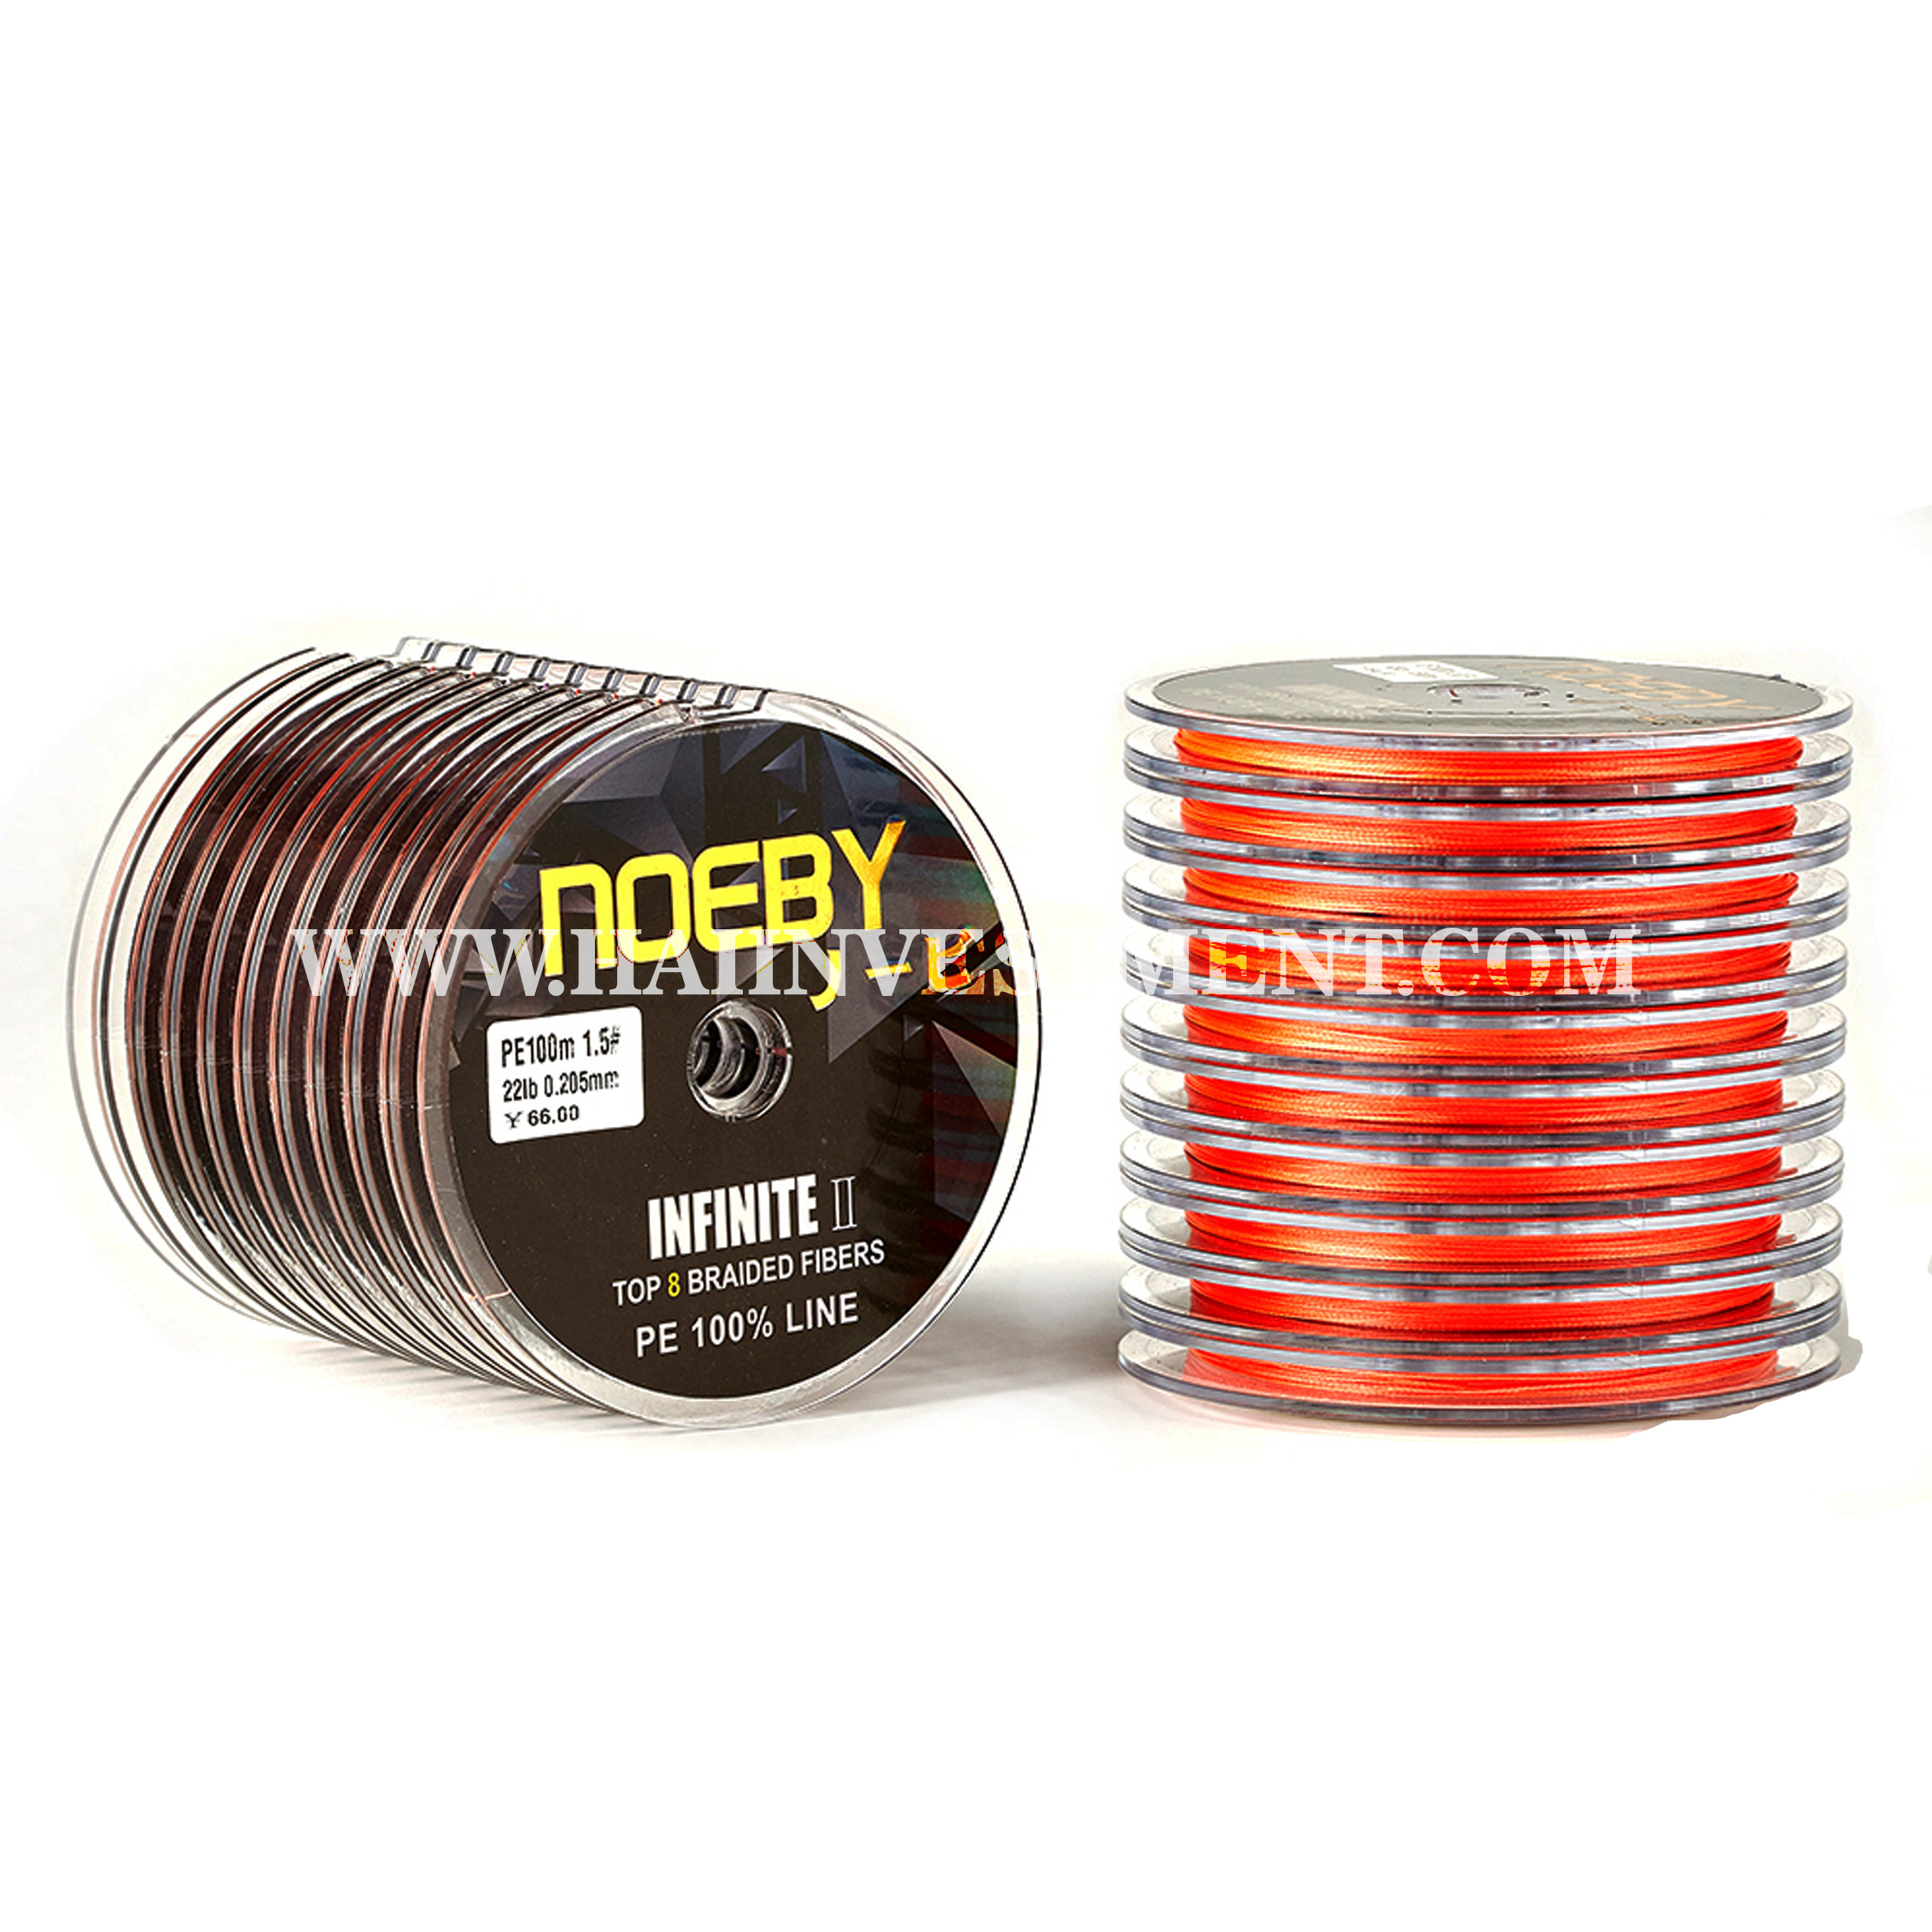 NOEBY fishing line 8 braided 300m PE line colorful wire INFINITE